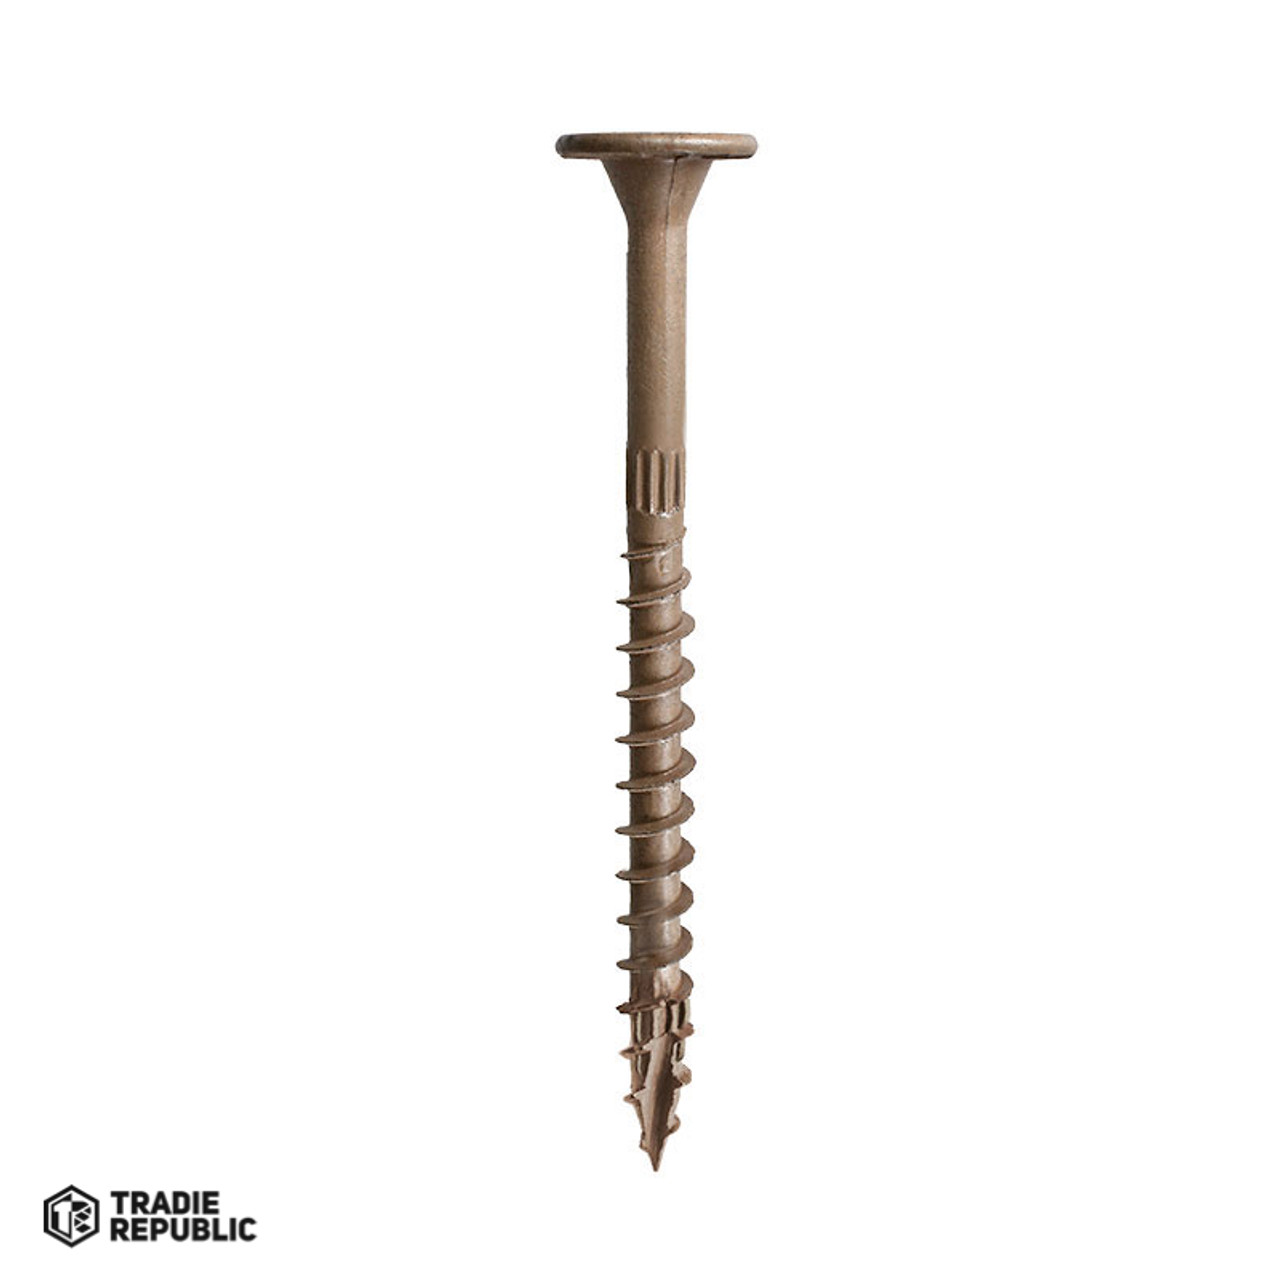  Simpson Strong-Tie Strong-Drive SDWS Timber Screw 6” .220x5.6x152mm